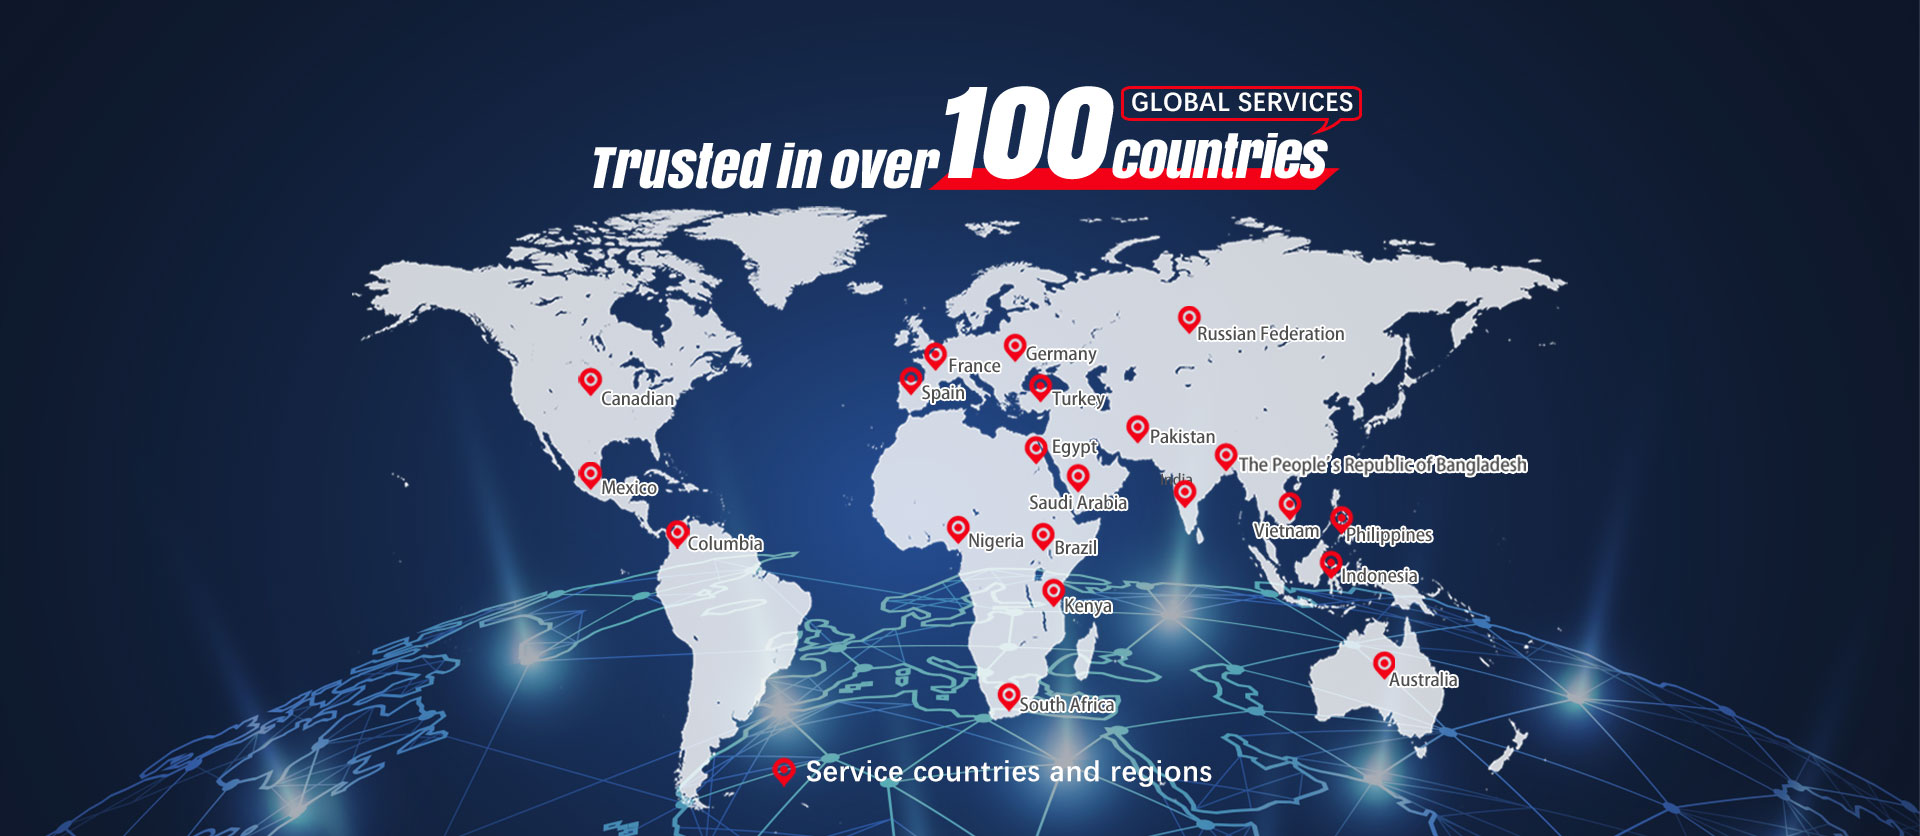 Trusted in over 100 countries